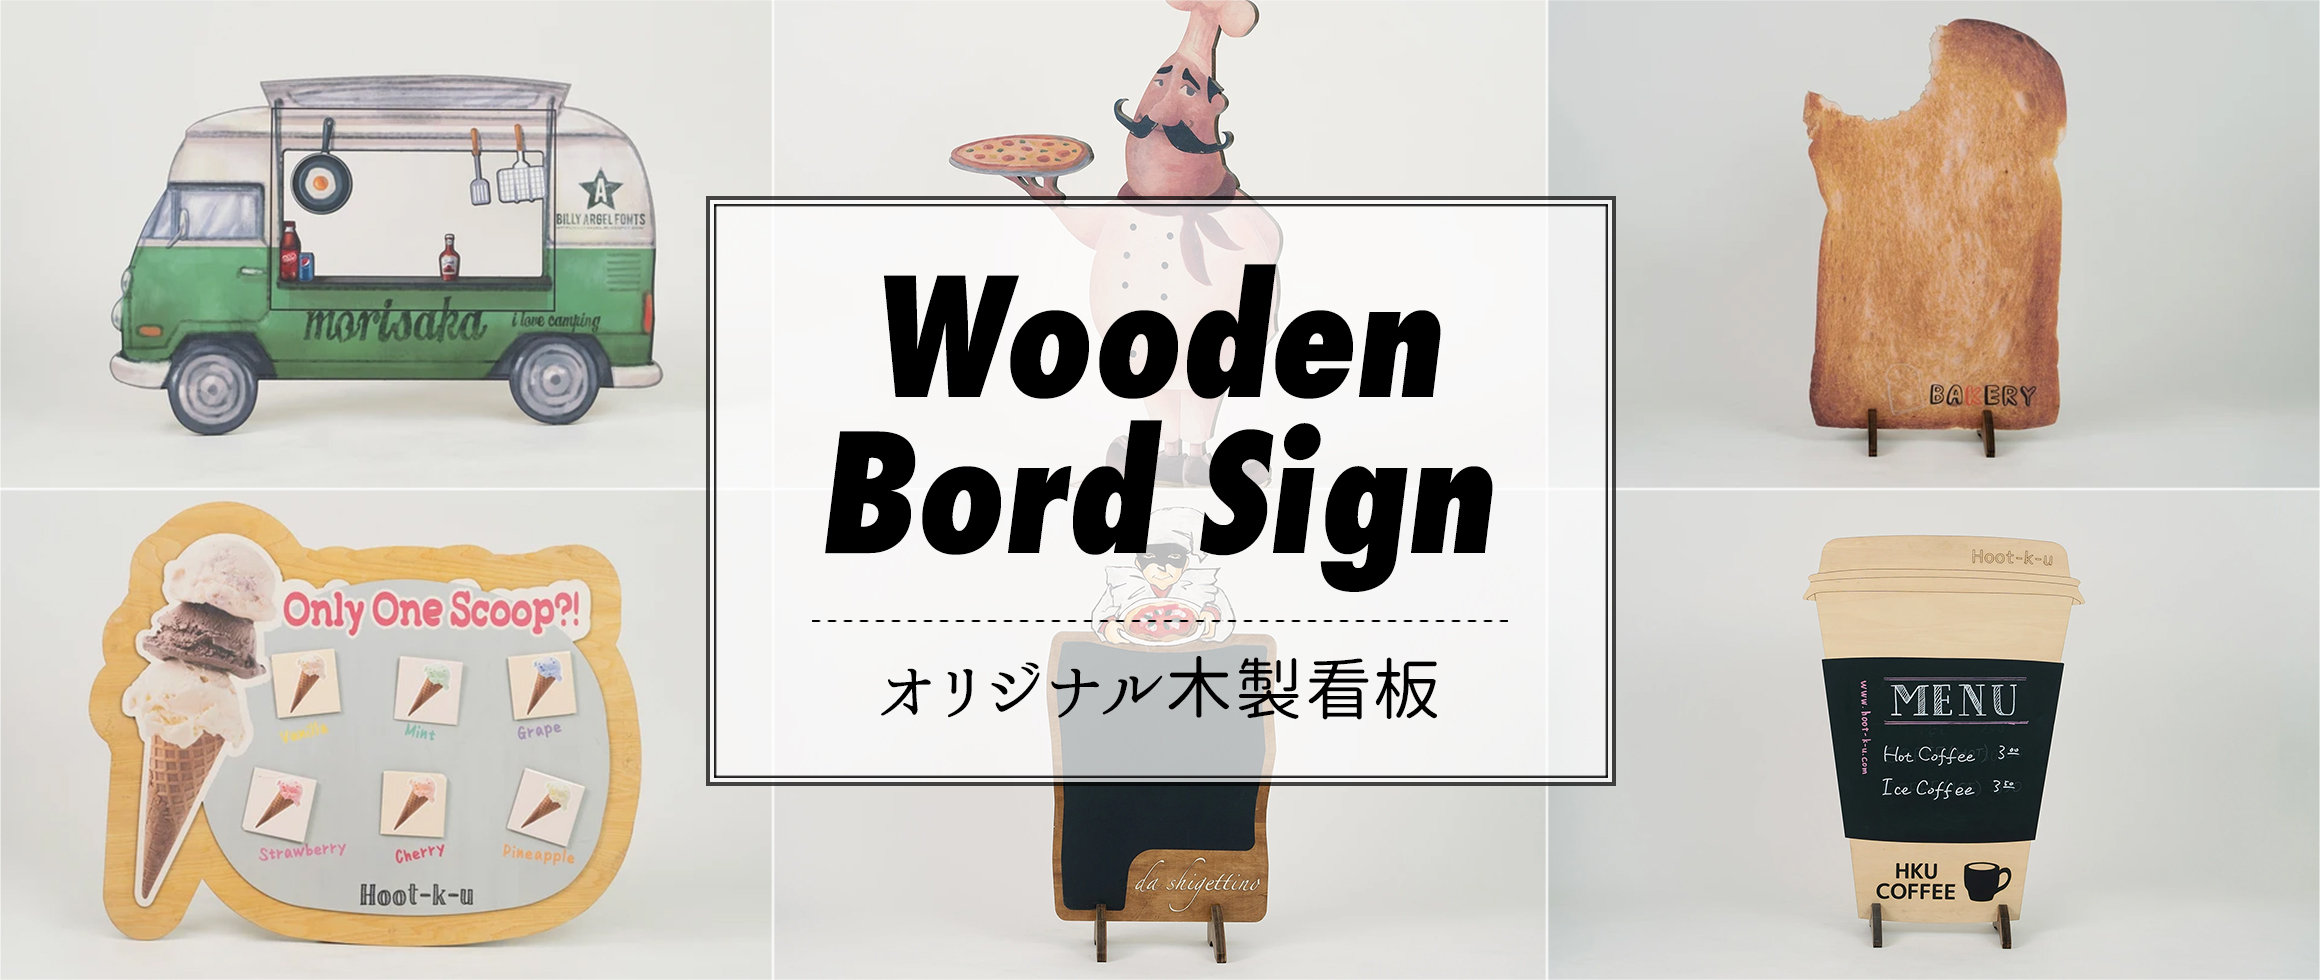 wooden bord sign